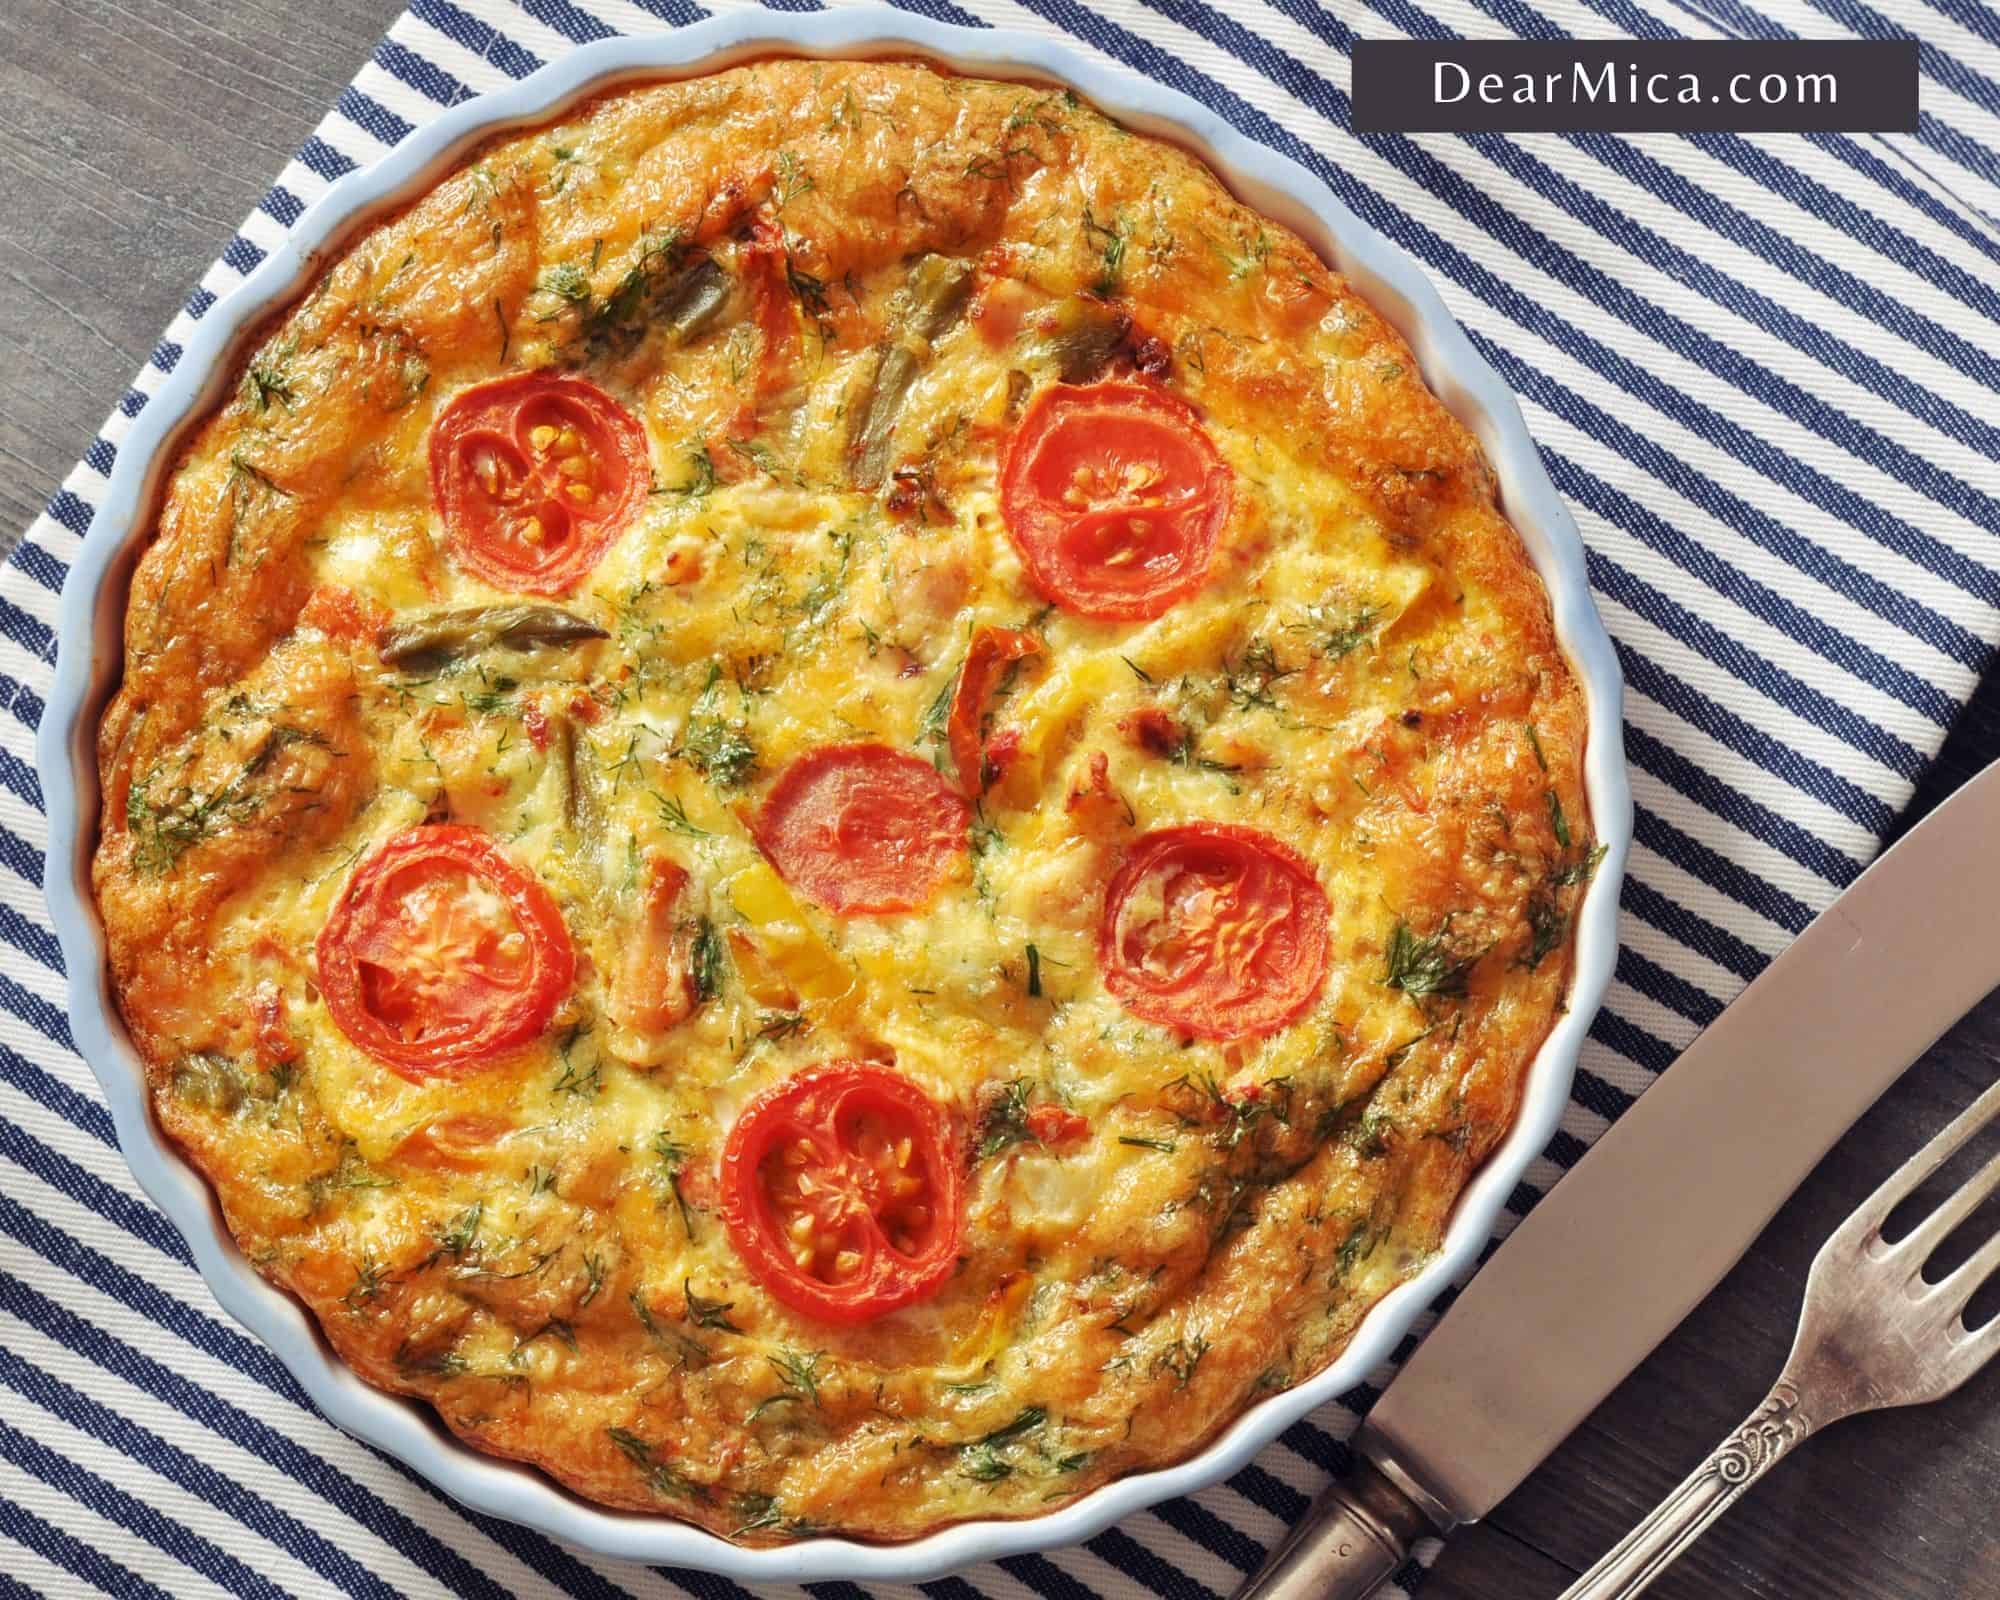 Top view of a low carb turkey frittata with vegetables served on a shallow white baking dish